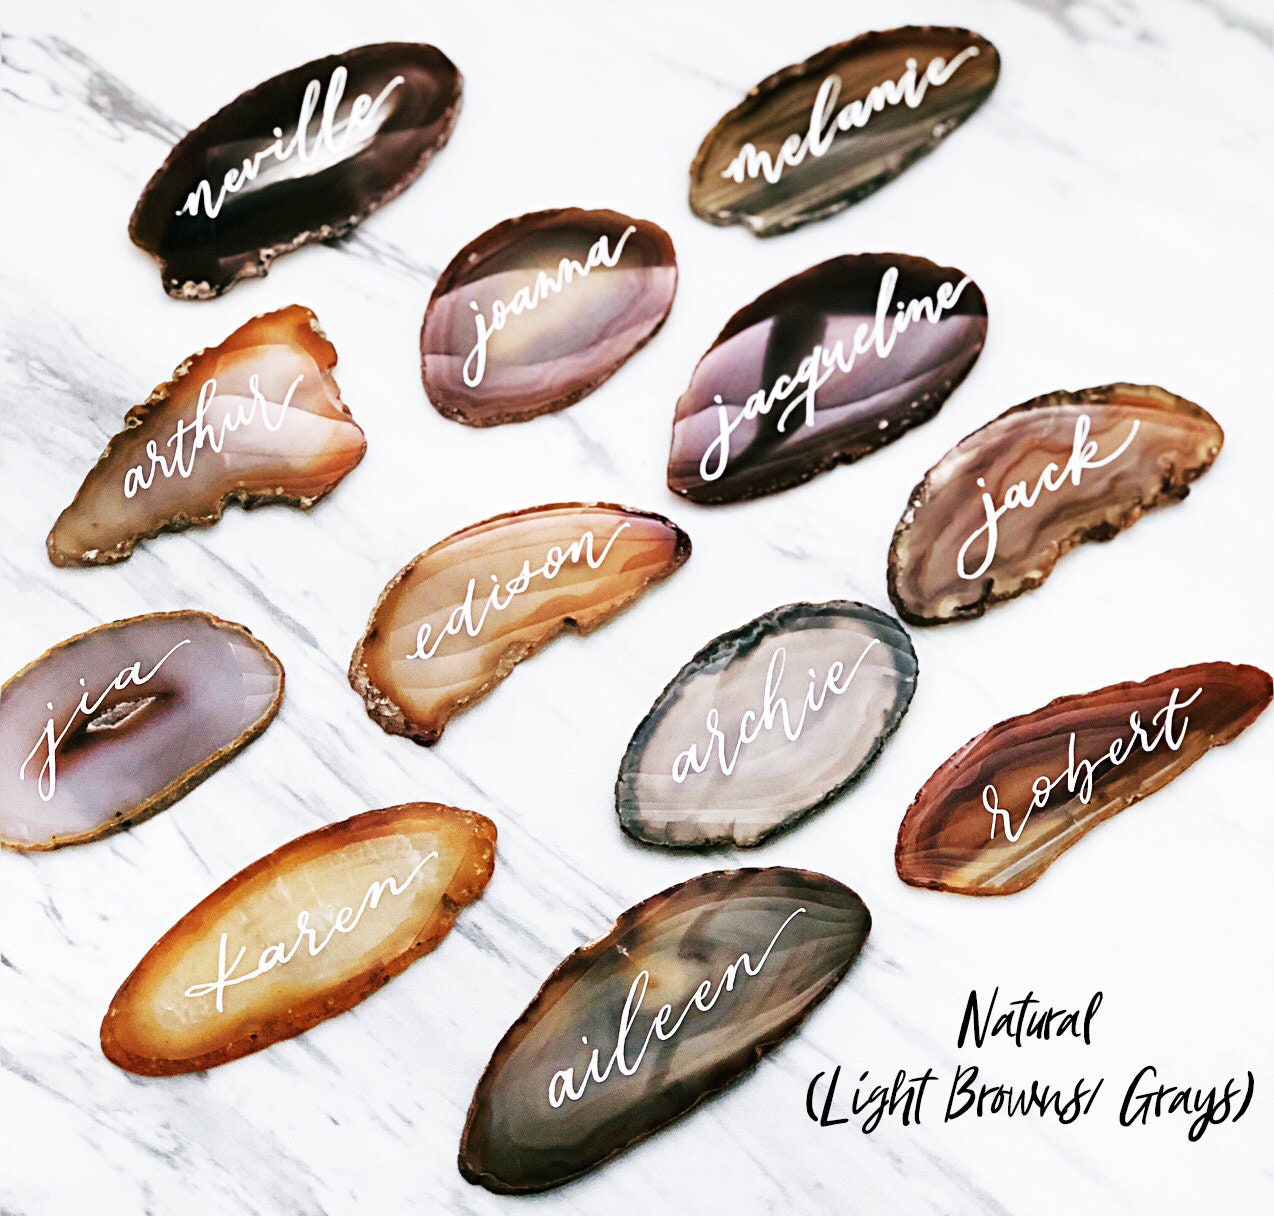 2.5" - 3" Red Dark Brown Natural Agate Slice Calligraphy Place Cards | Agate Slice Name Cards